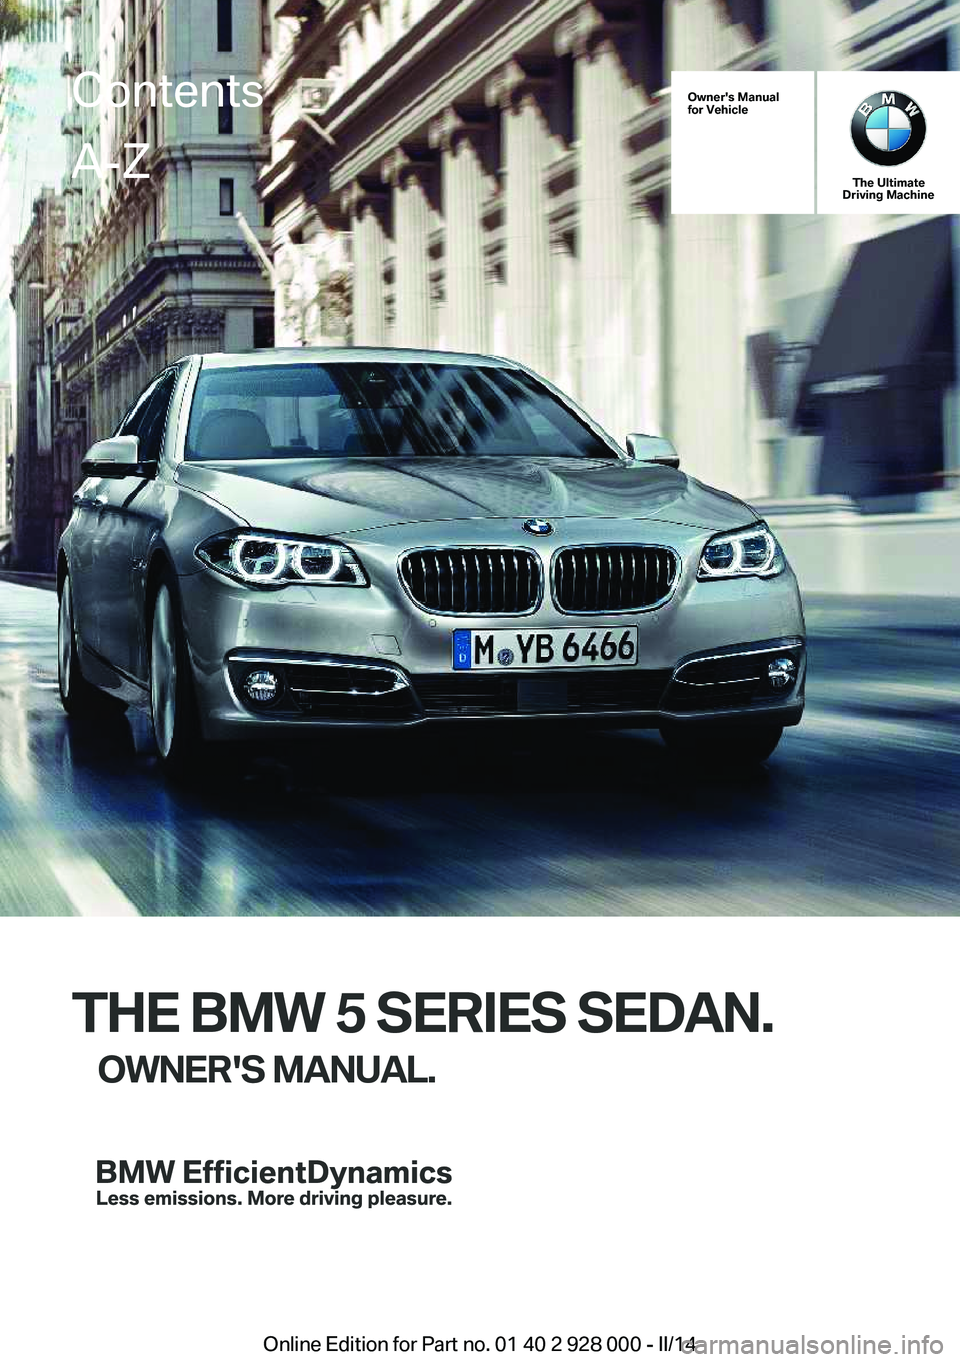 BMW 535I XDRIVE 2014  Owners Manual Owner's Manual
for Vehicle
The Ultimate
Driving Machine
THE BMW 5 SERIES SEDAN.
OWNER'S MANUAL.
ContentsA-Z
Online Edition for Part no. 01 40 2 928 000 - II/14   